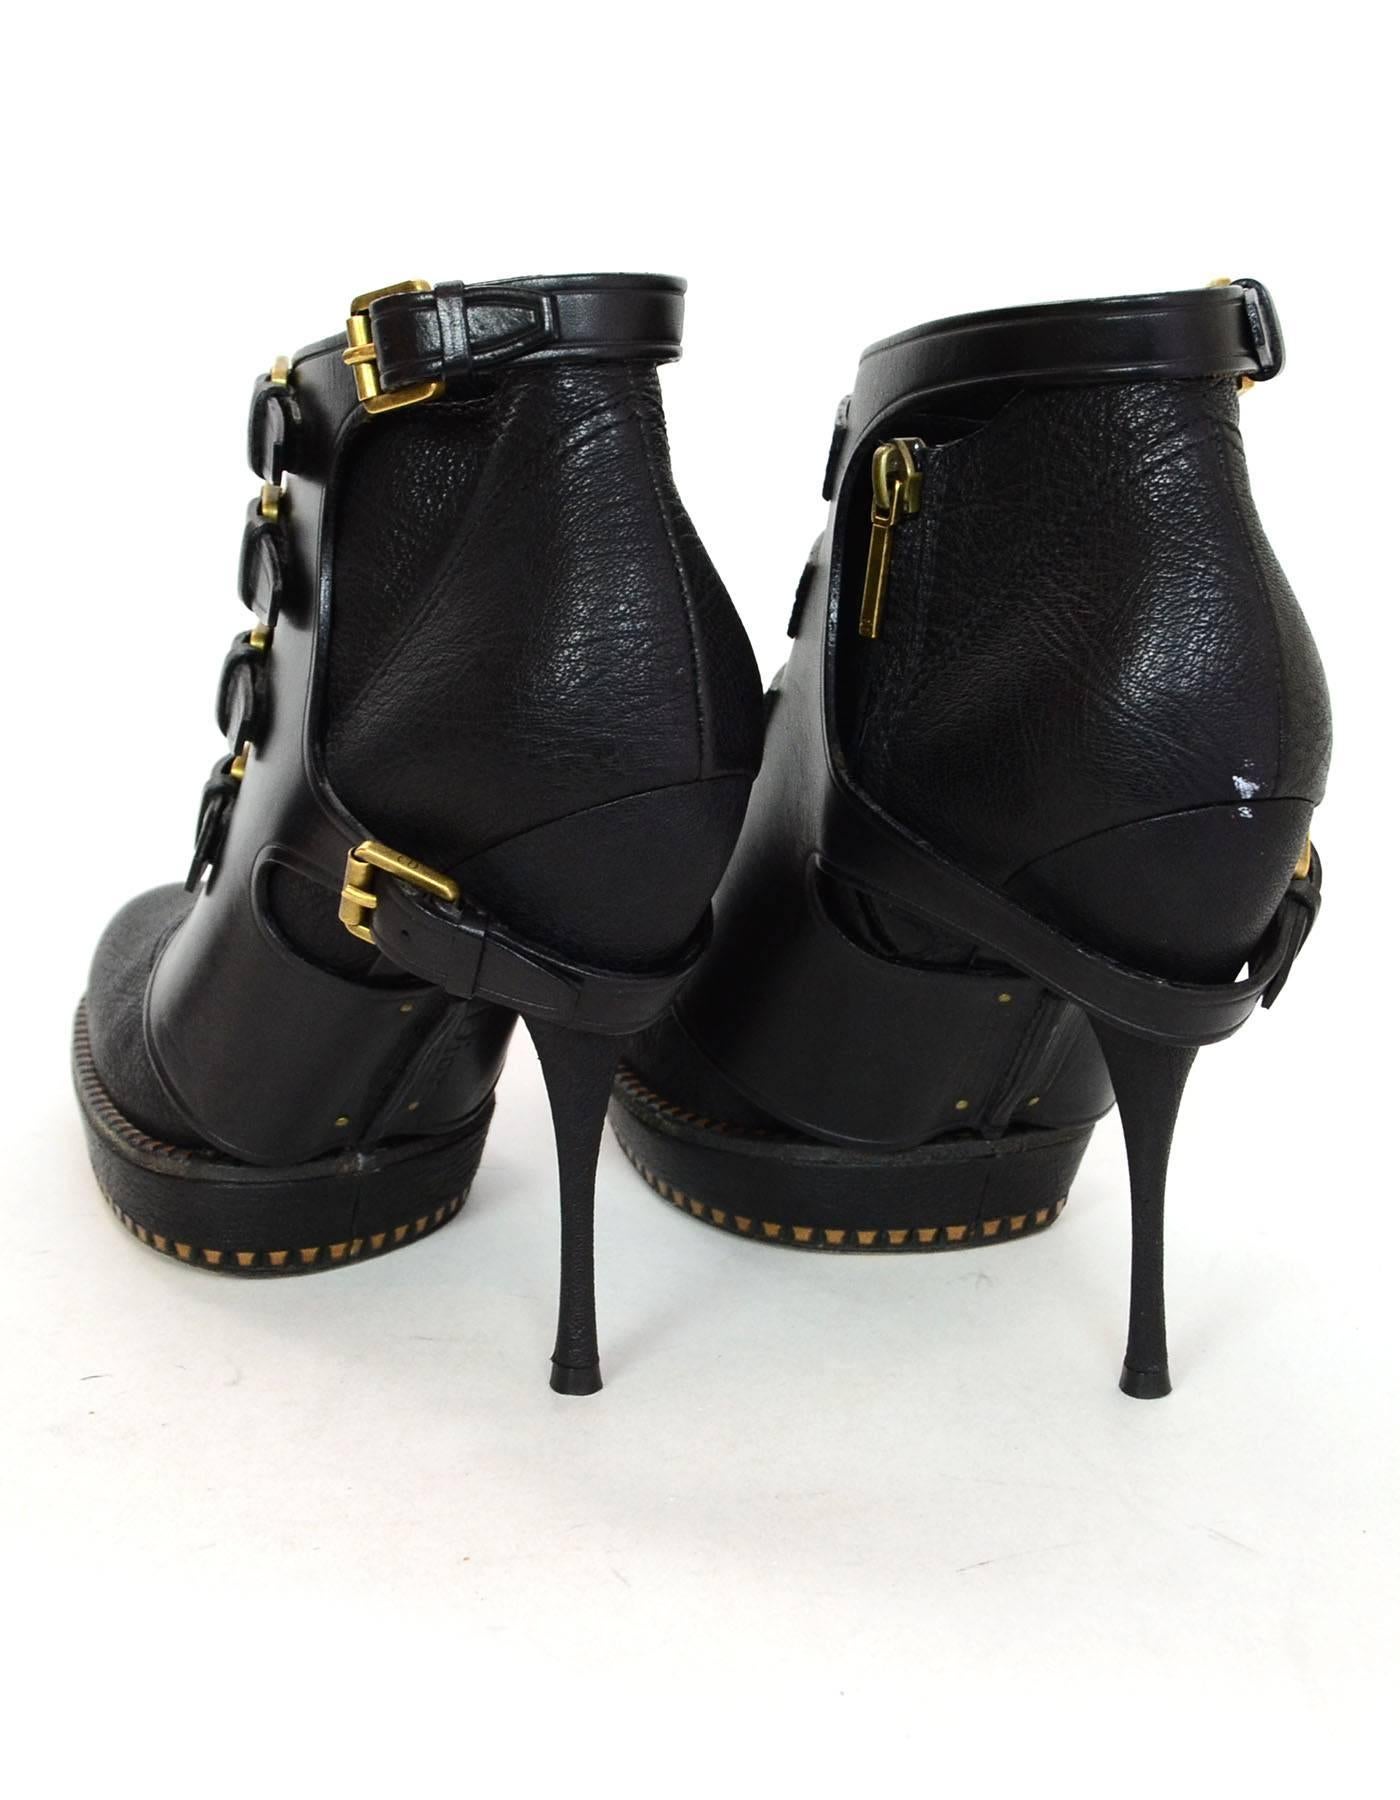 Women's Christian Dior Black Leather Booties with Buckles Sz 40